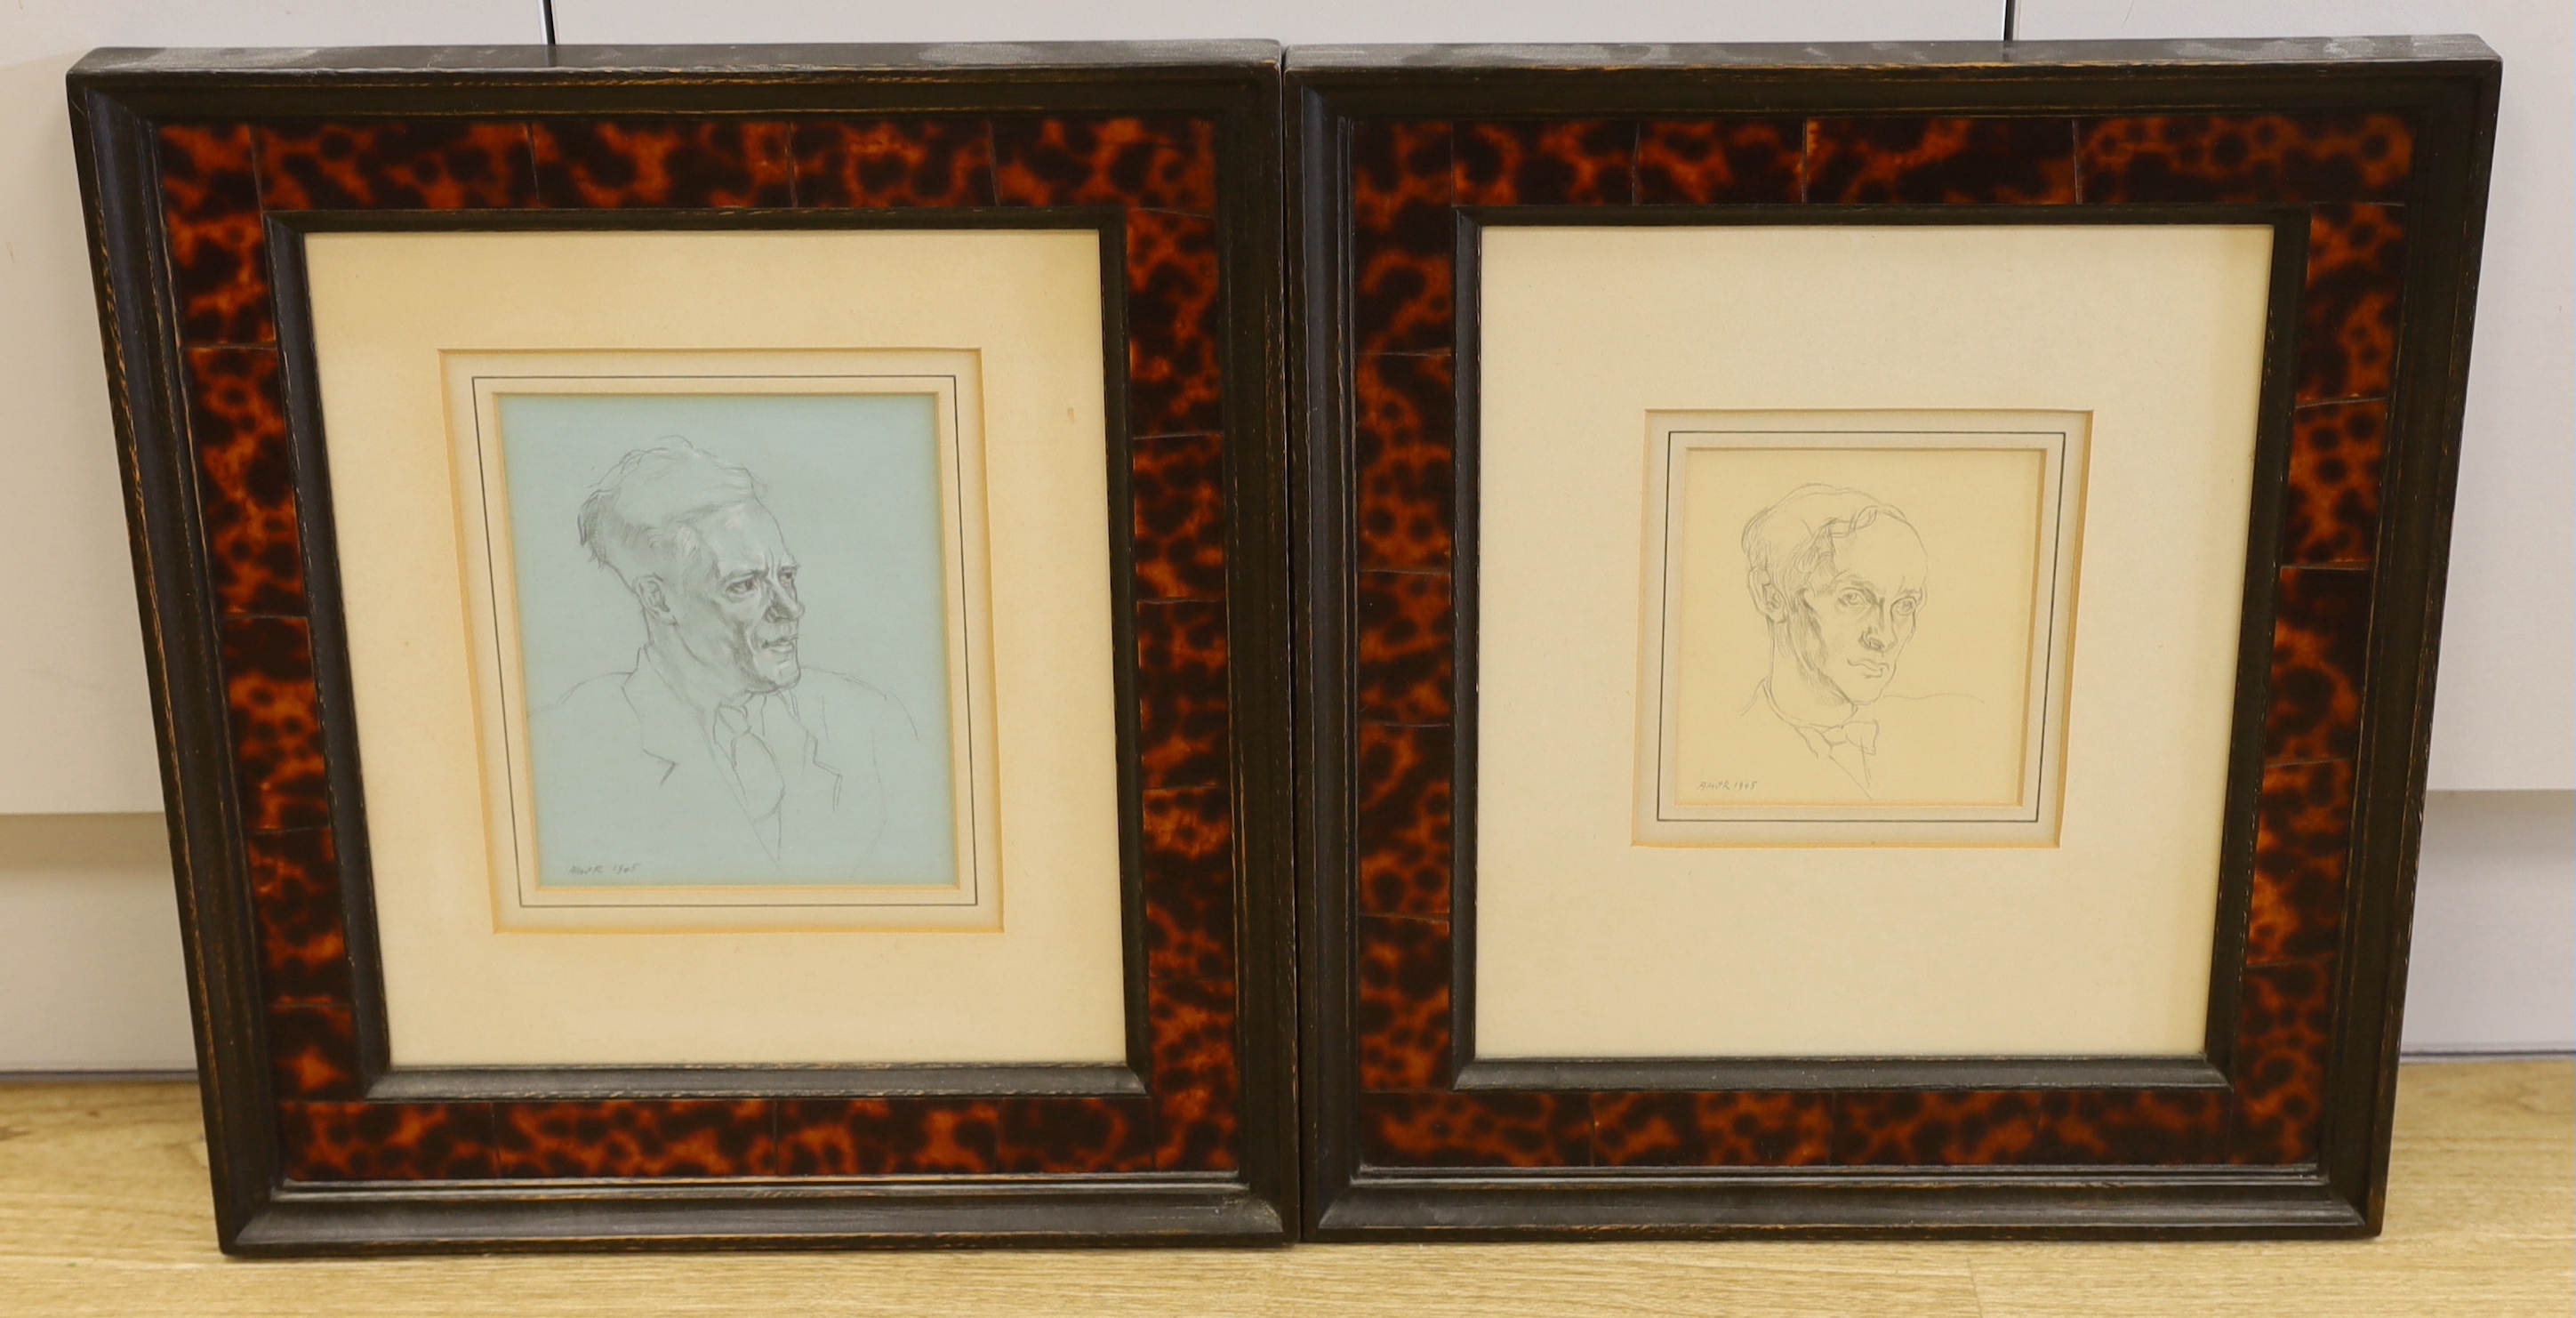 Albert R., two pencil drawings, 'Professor Lord David Cecil' and 'Professor Nevill Coghill Esq.', signed and dated 1945, 14 x 12.5cm and 19 x 15.5cm, matching simulated tortoiseshell frames